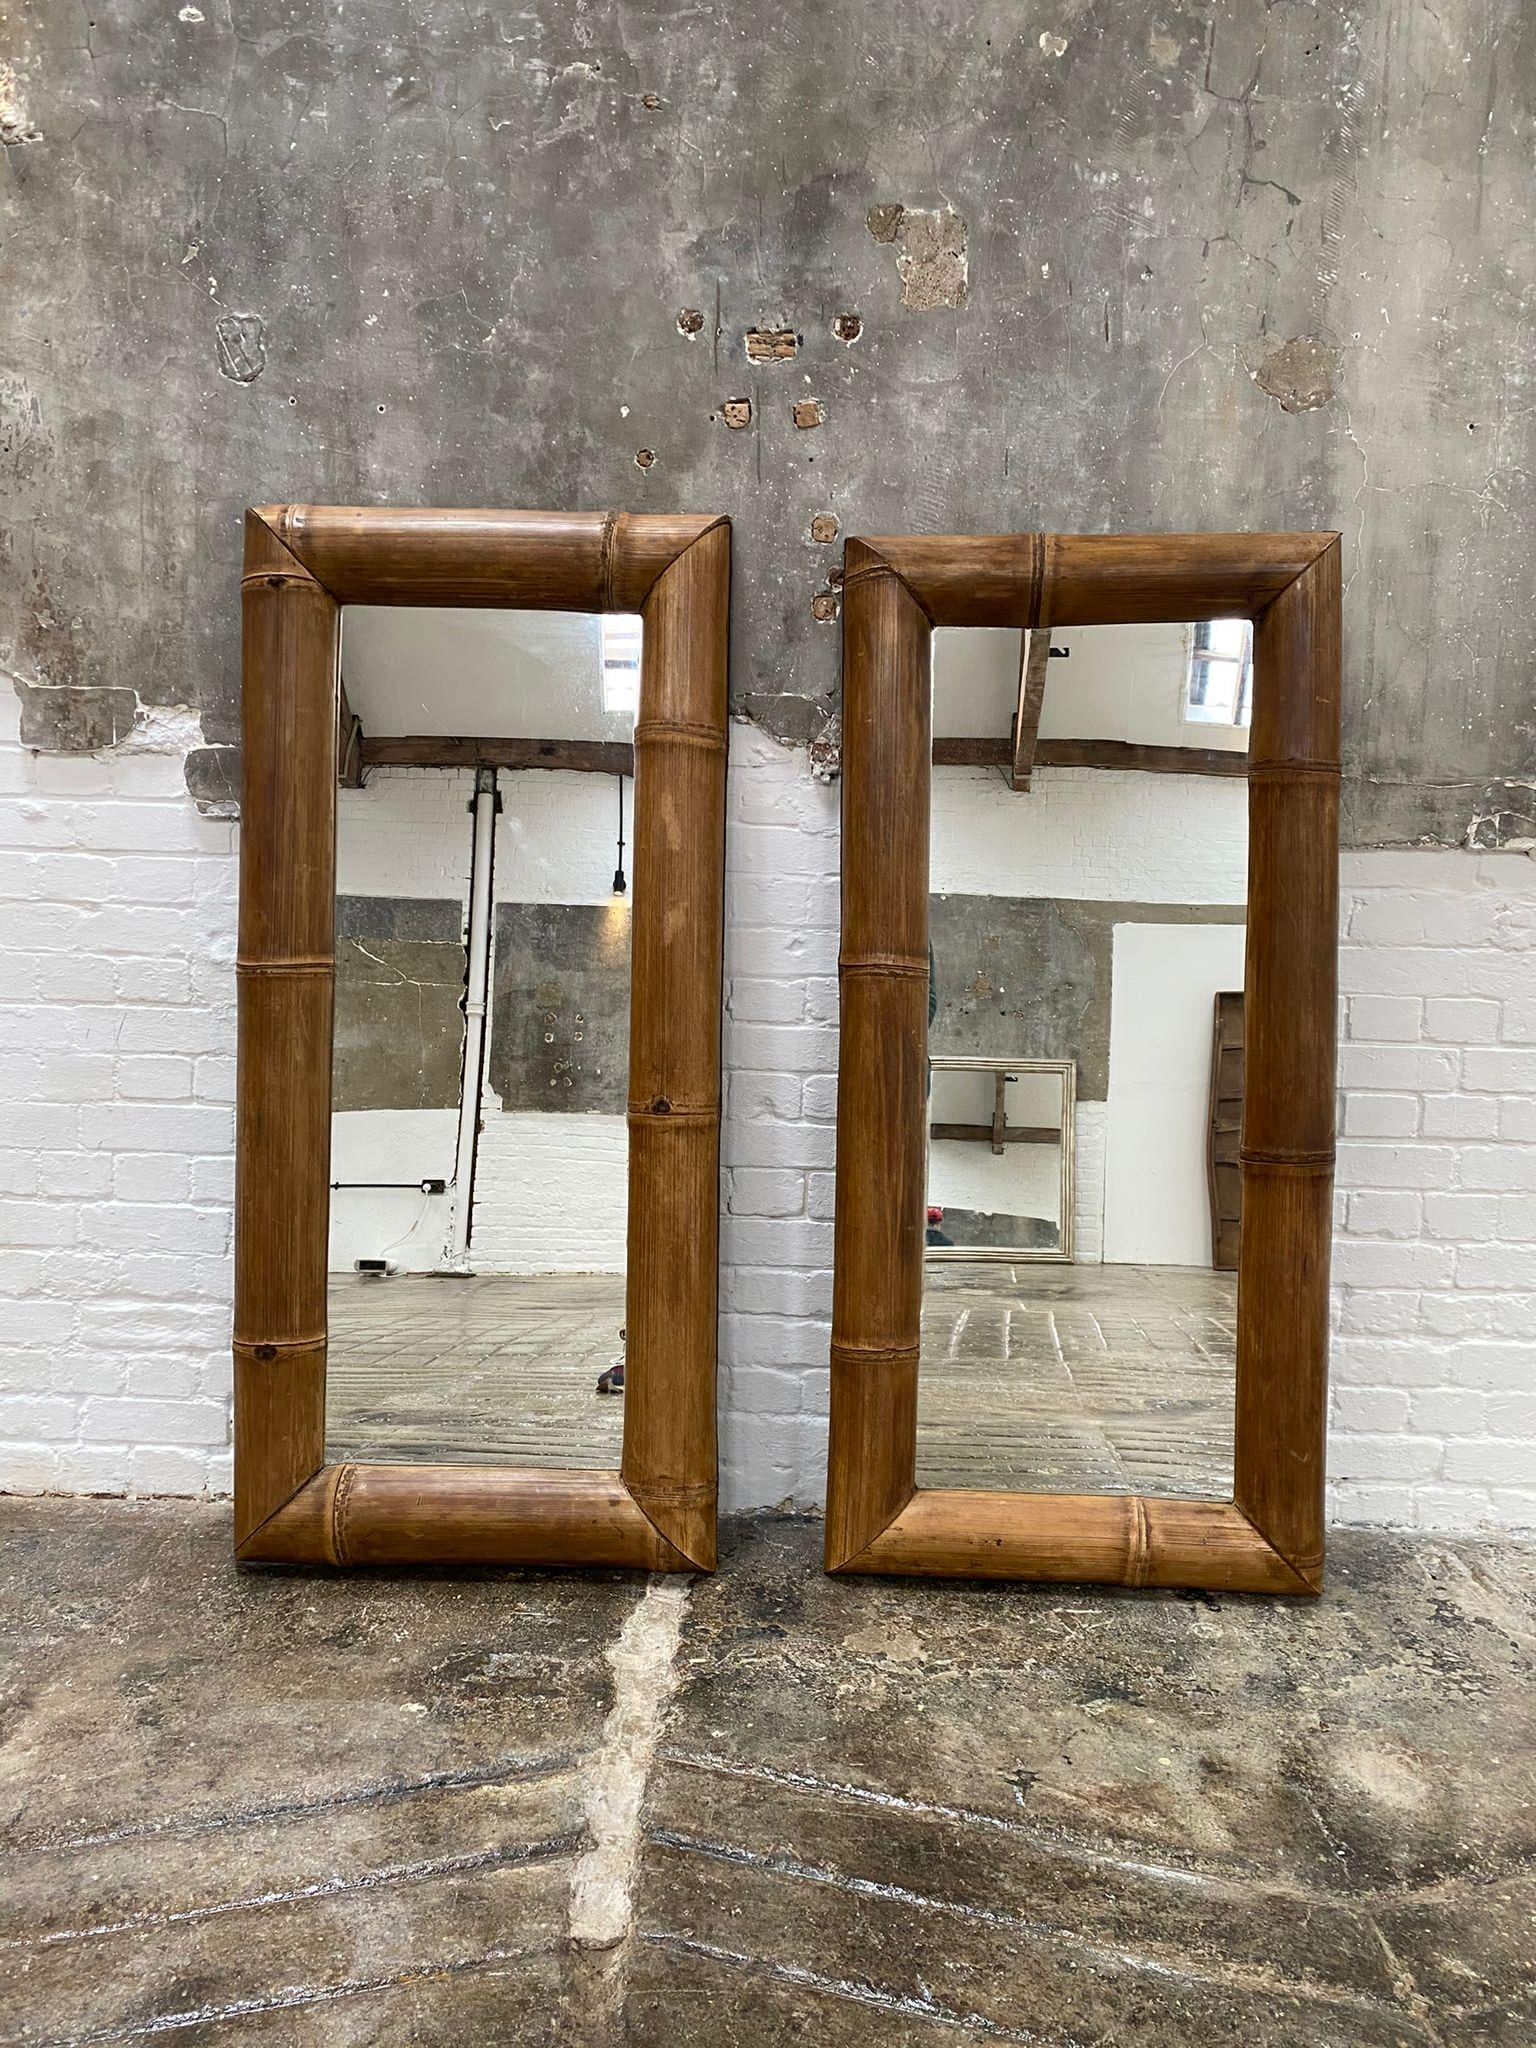 A real wow! pair of jumbo bamboo mirrors. A bold pair that really make a statement. The natural bamboo gives a textural quality that is an excellent foil to other textures and sculptural notes in a room.
